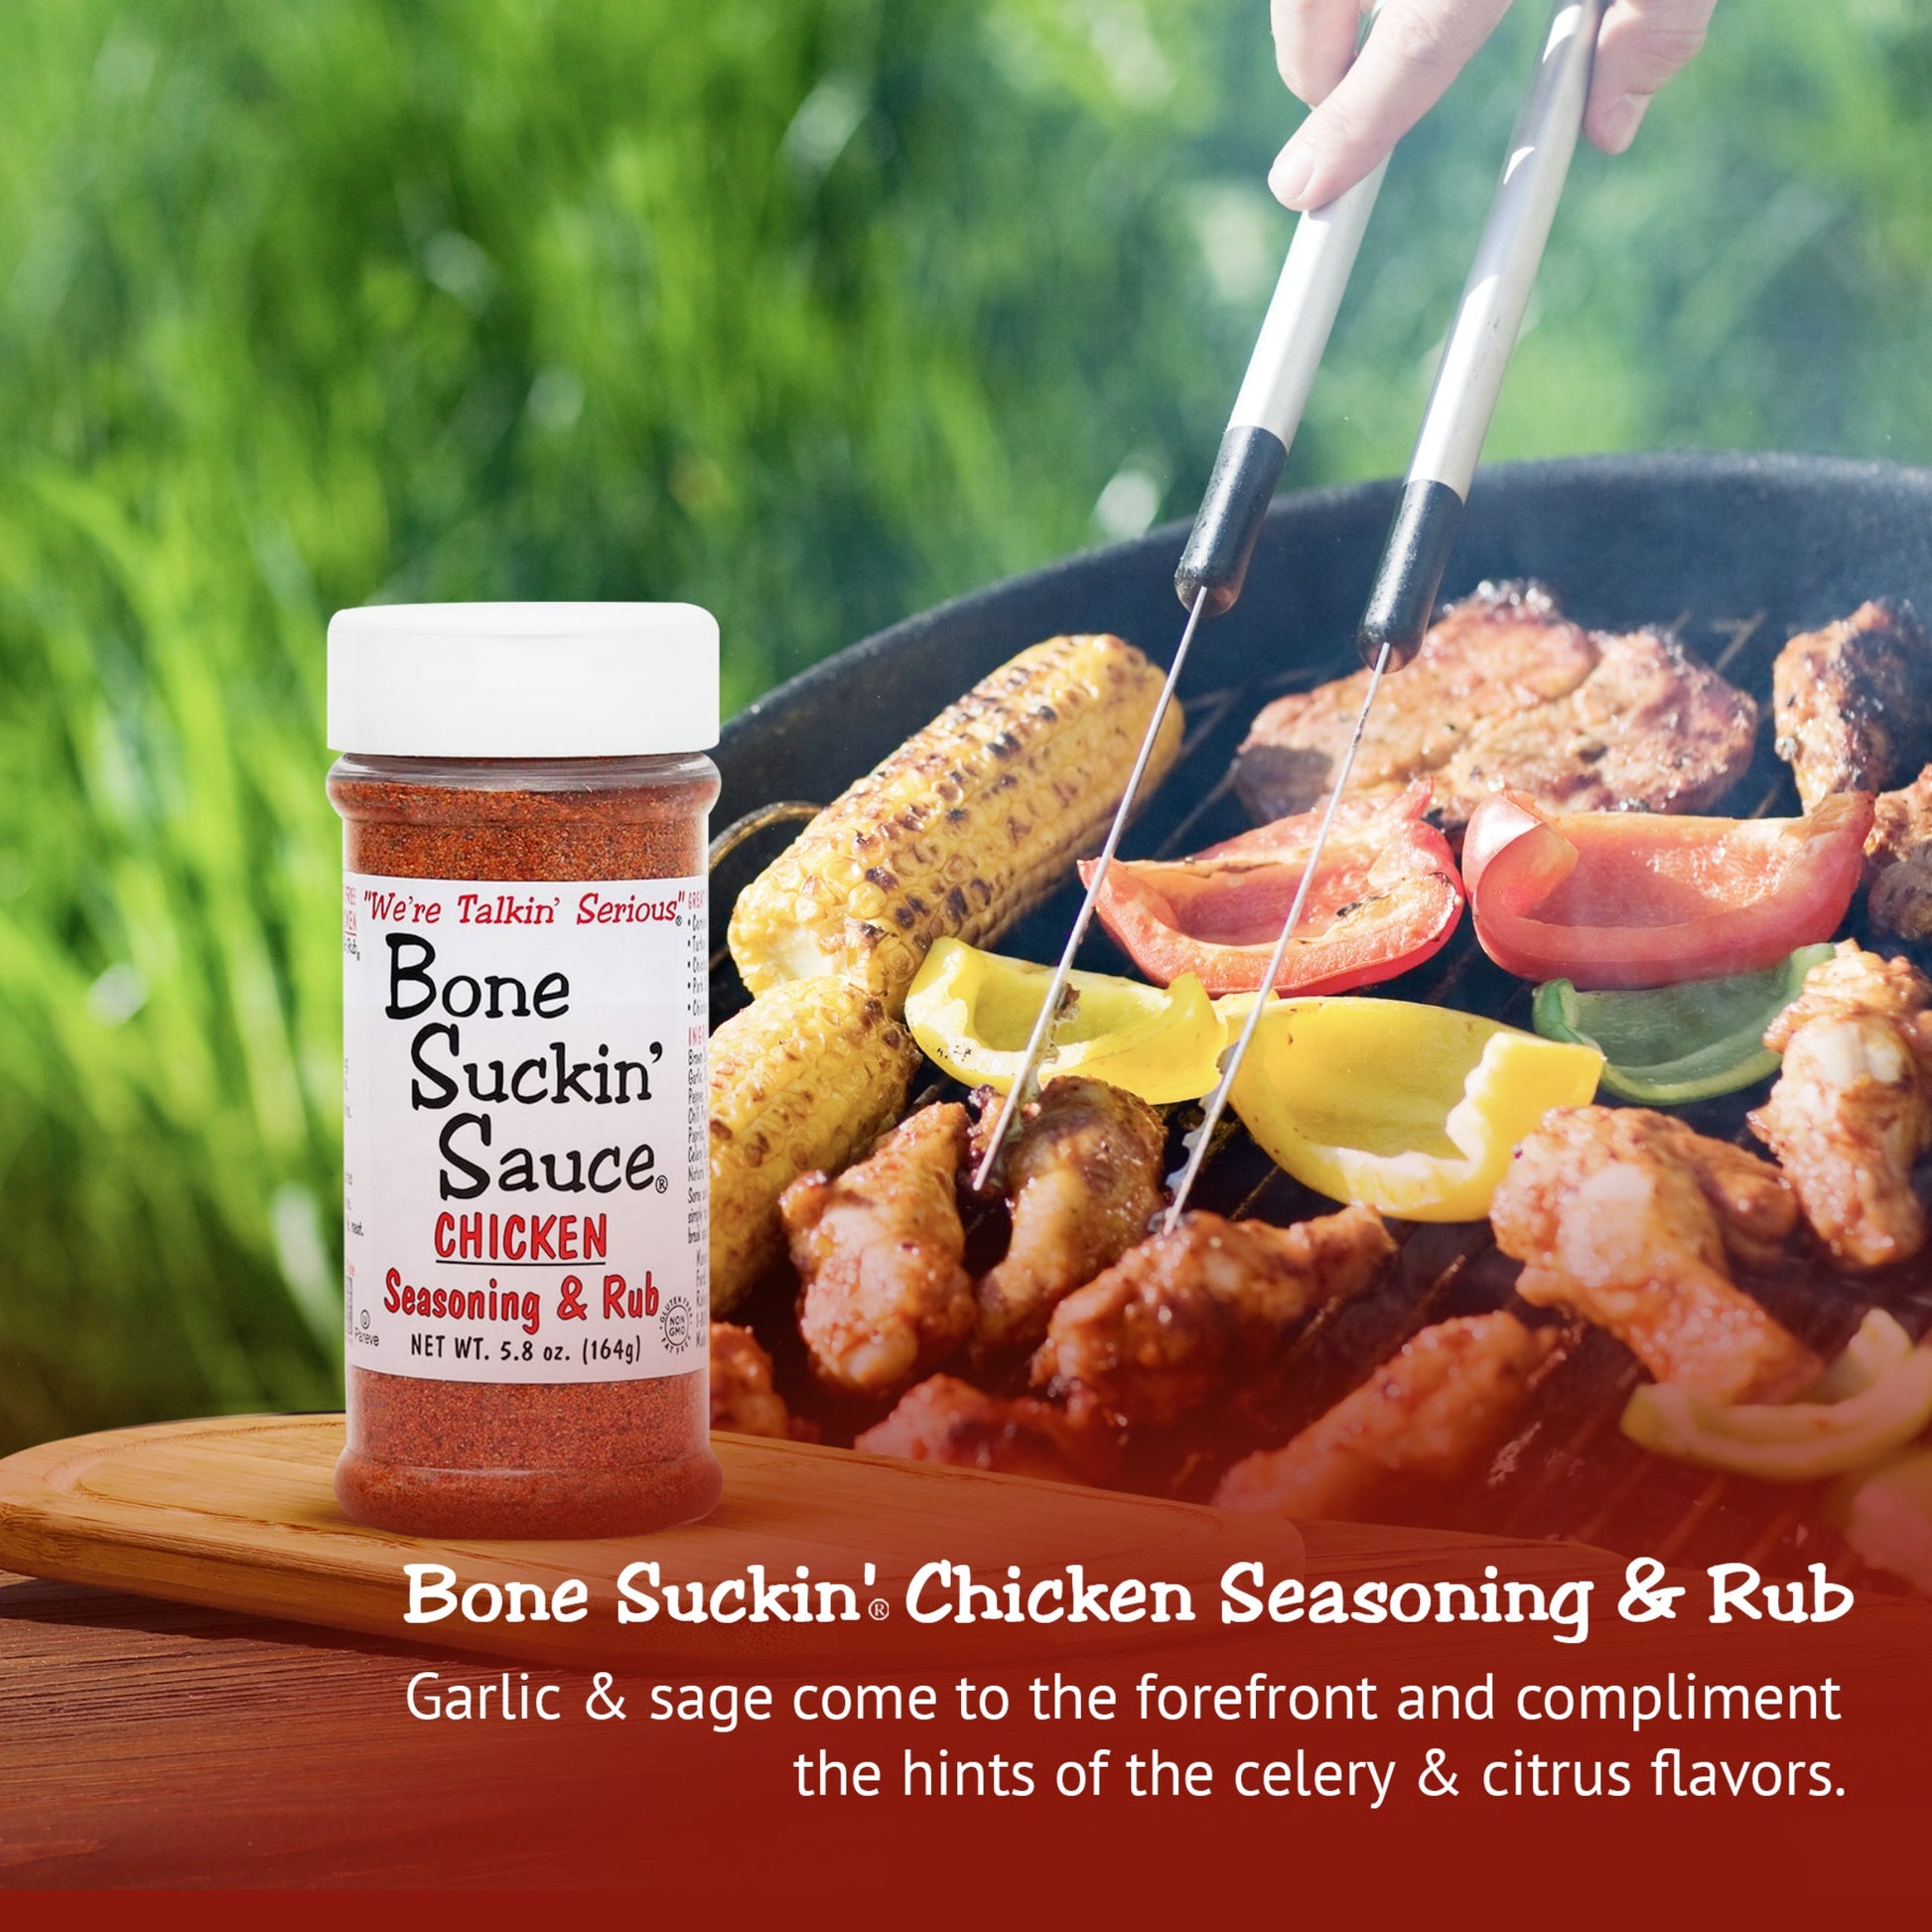 Bone Suckin'® Chicken Seasoning & Rub, 5.8 oz. A lighter blend of the brown sugar, paprika and spices found in the Original Seasoning & Rub, garlic and sage come to the forefront of our poultry blend.